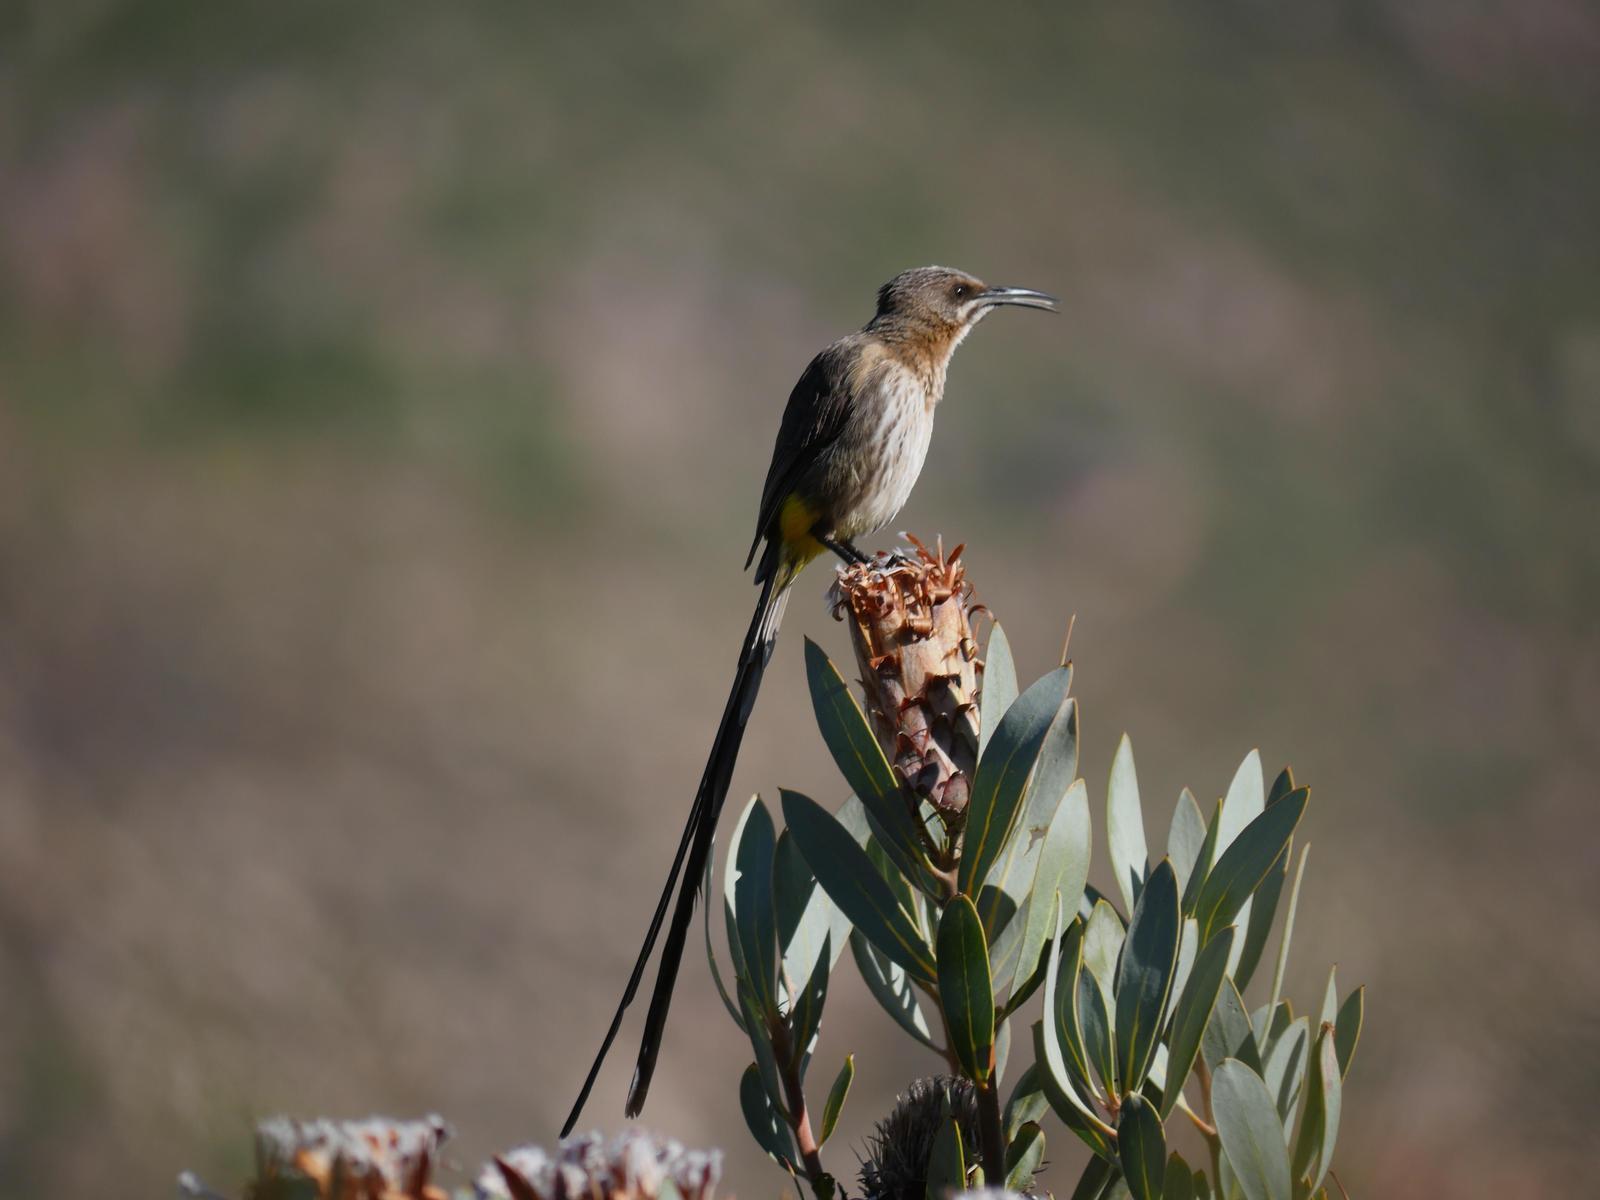 Cape Sugarbird Photo by Peter Lowe